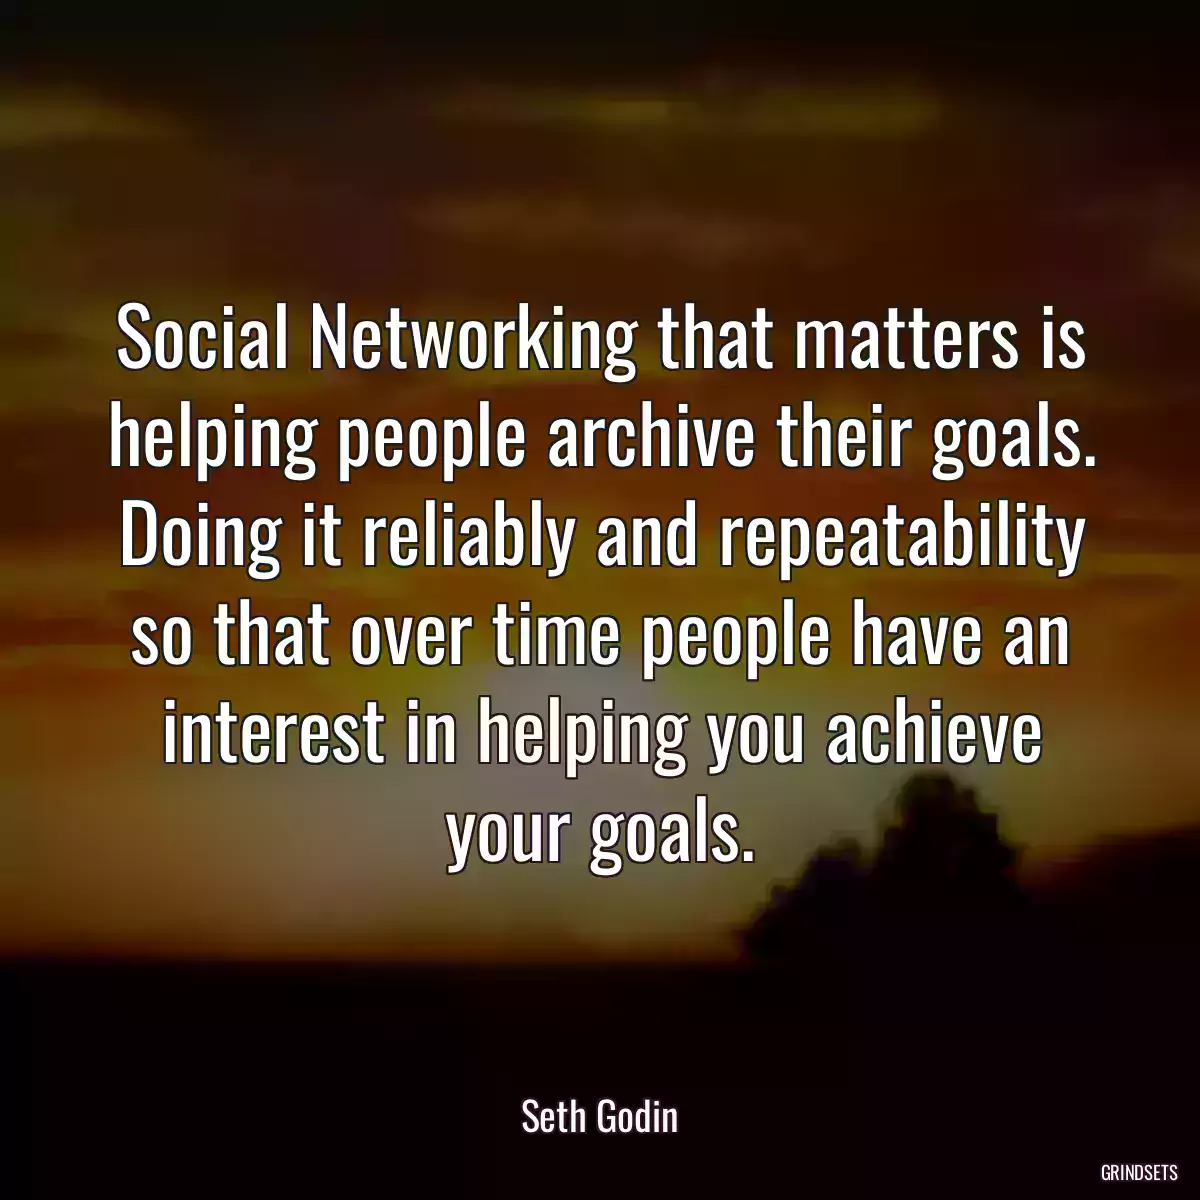 Social Networking that matters is helping people archive their goals. Doing it reliably and repeatability so that over time people have an interest in helping you achieve your goals.